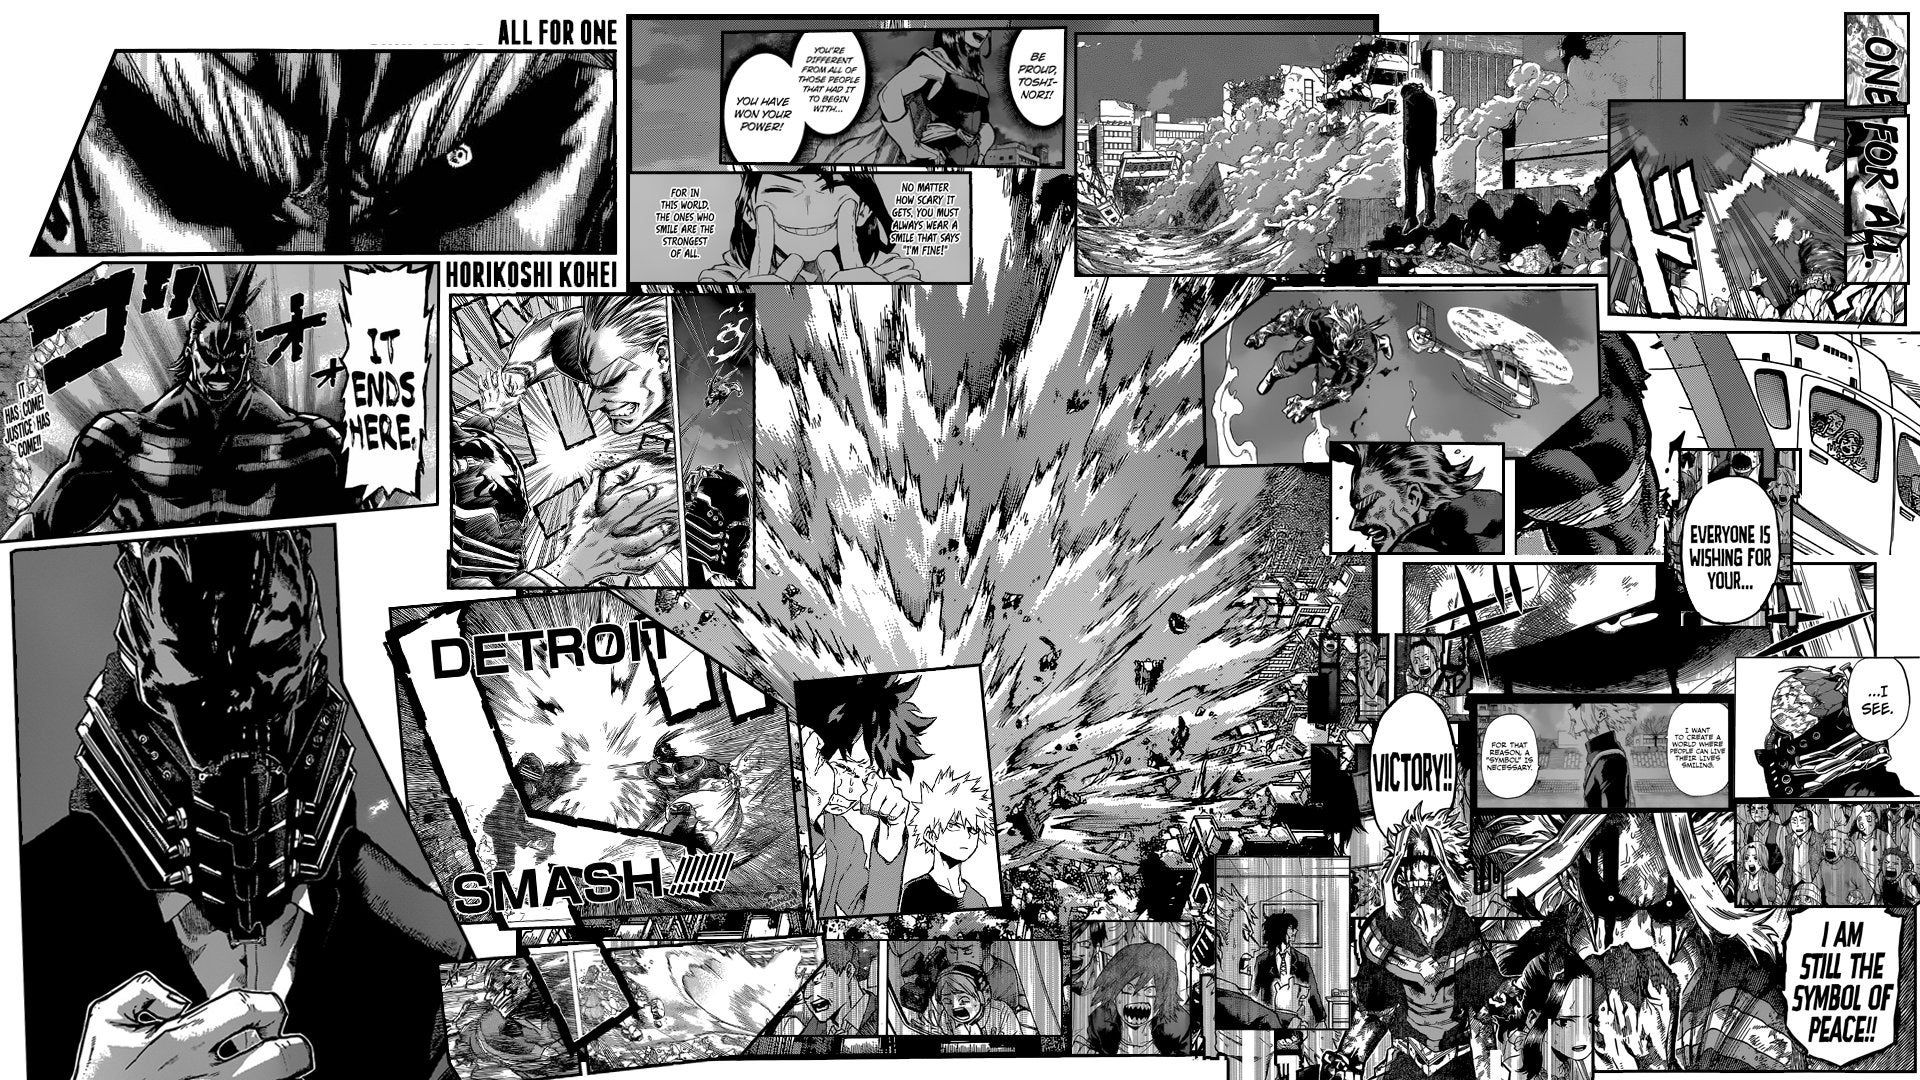 Manga collage wallpaper of the most hype moment in the manga